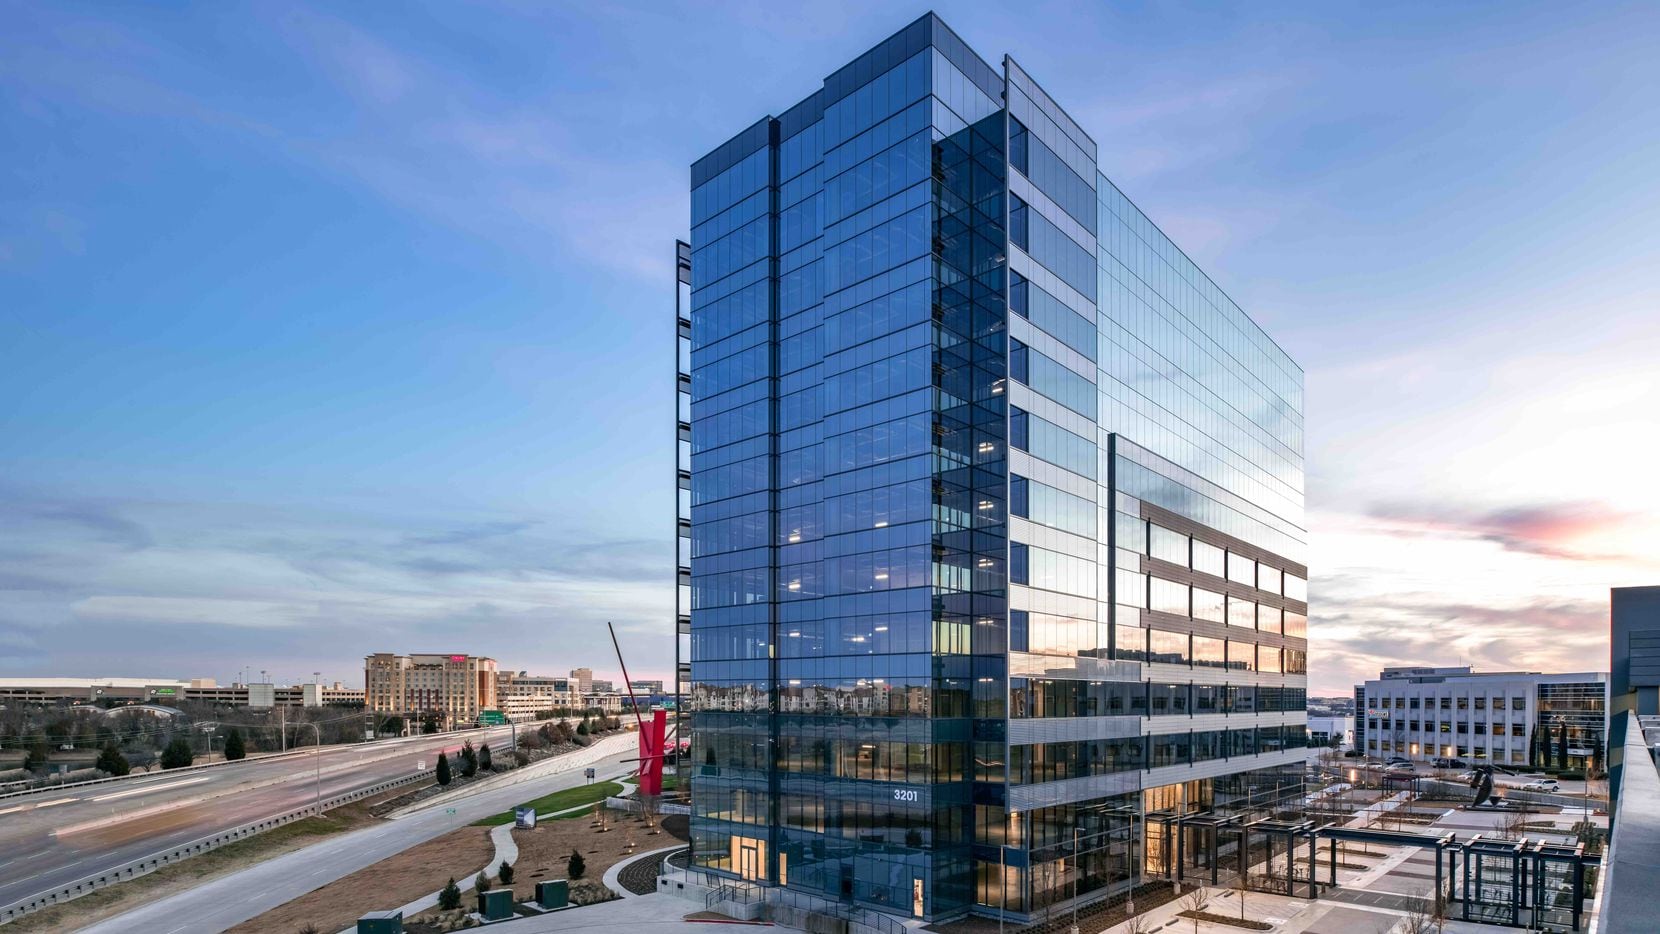 The 12-story 3201 Dallas Parkway building opened last year in Frisco's Hall Park.